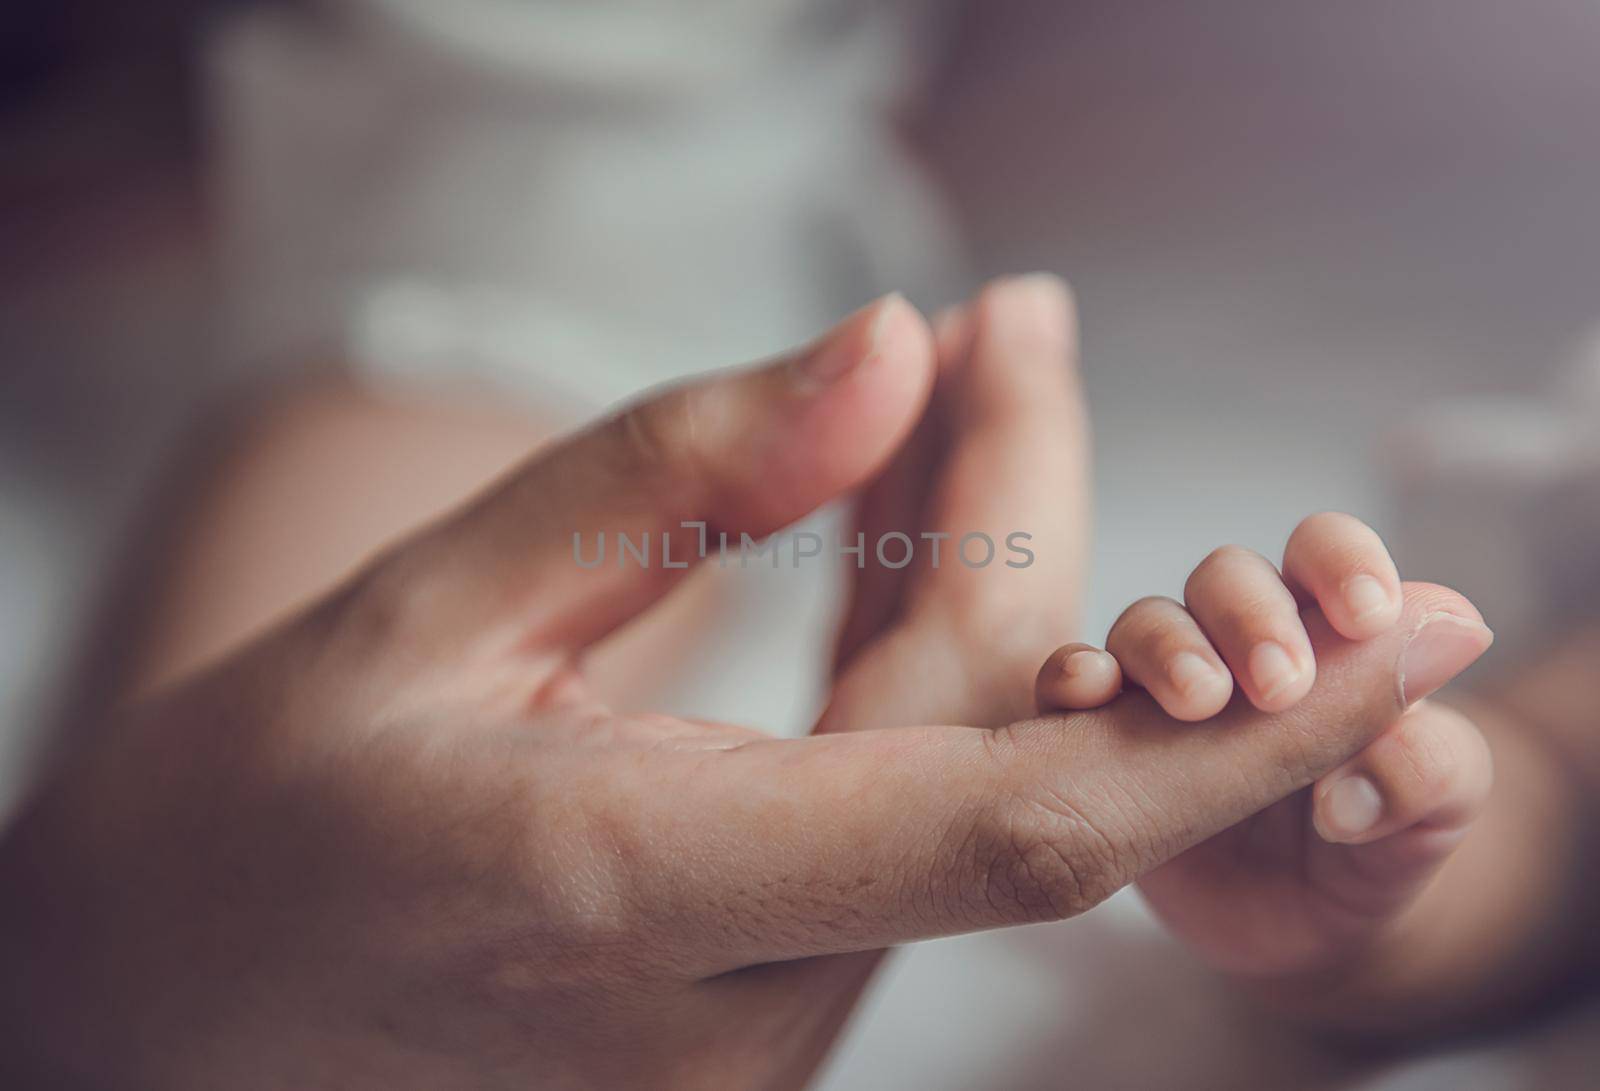 Newborn baby holding mother's hand. by thanumporn